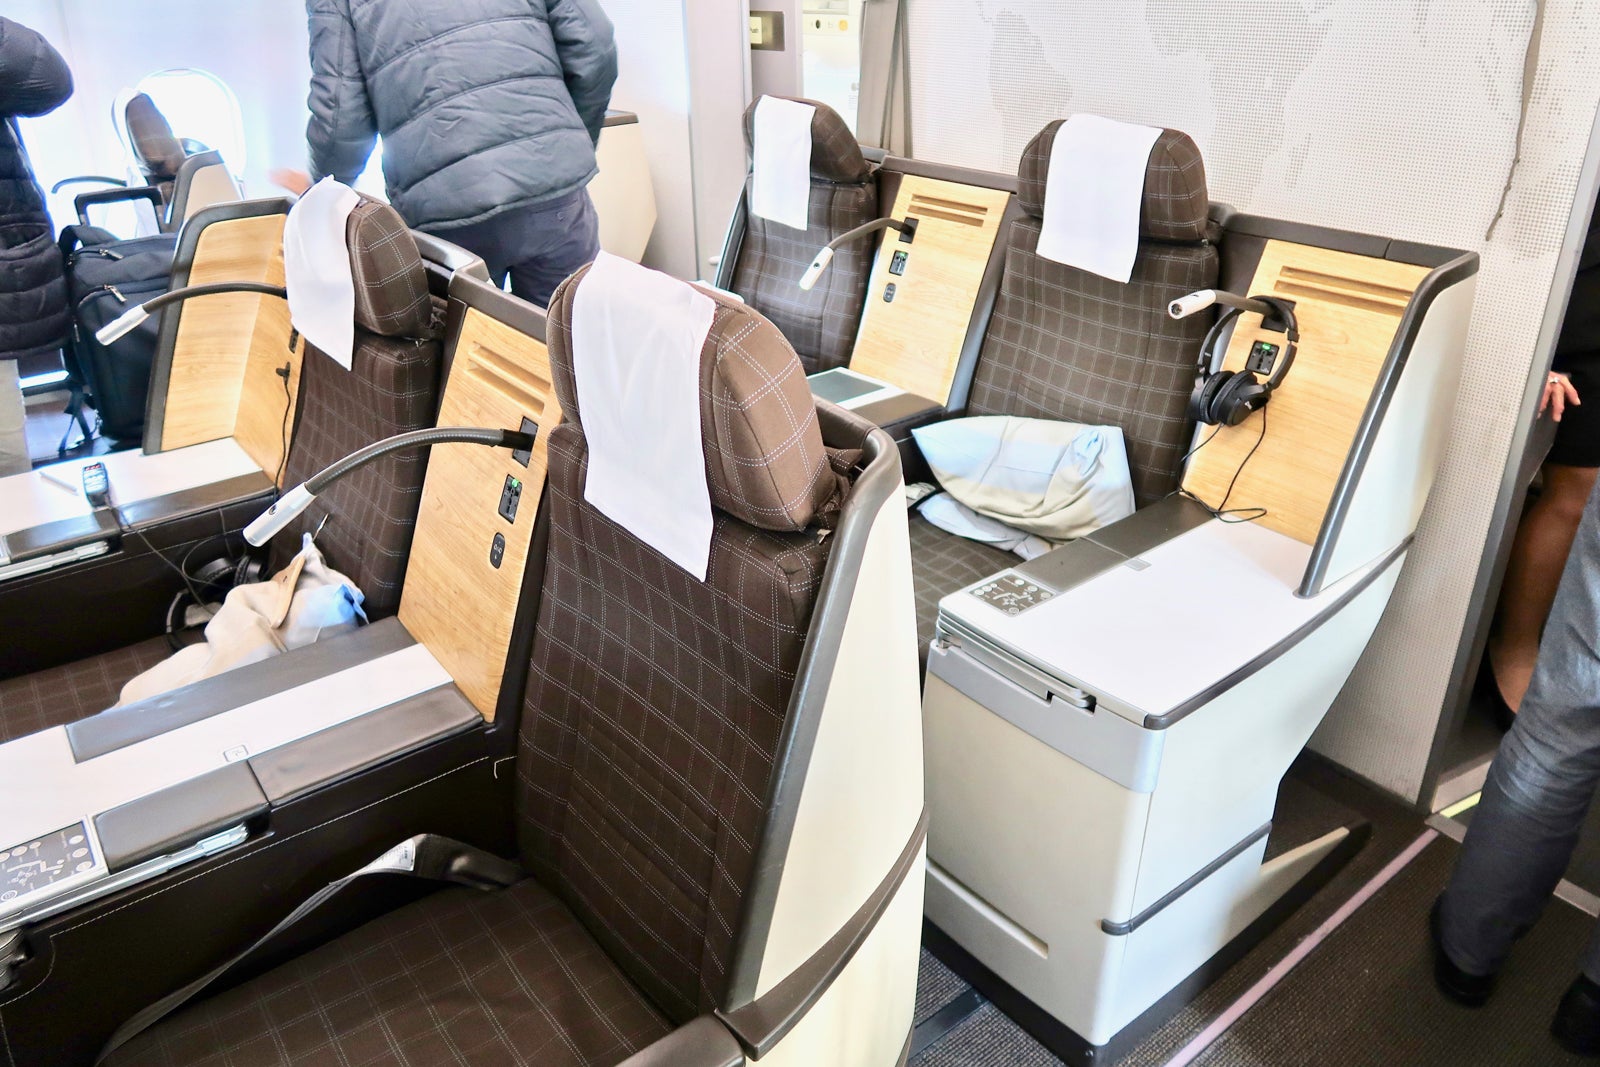 Middle seats in the forward business class section